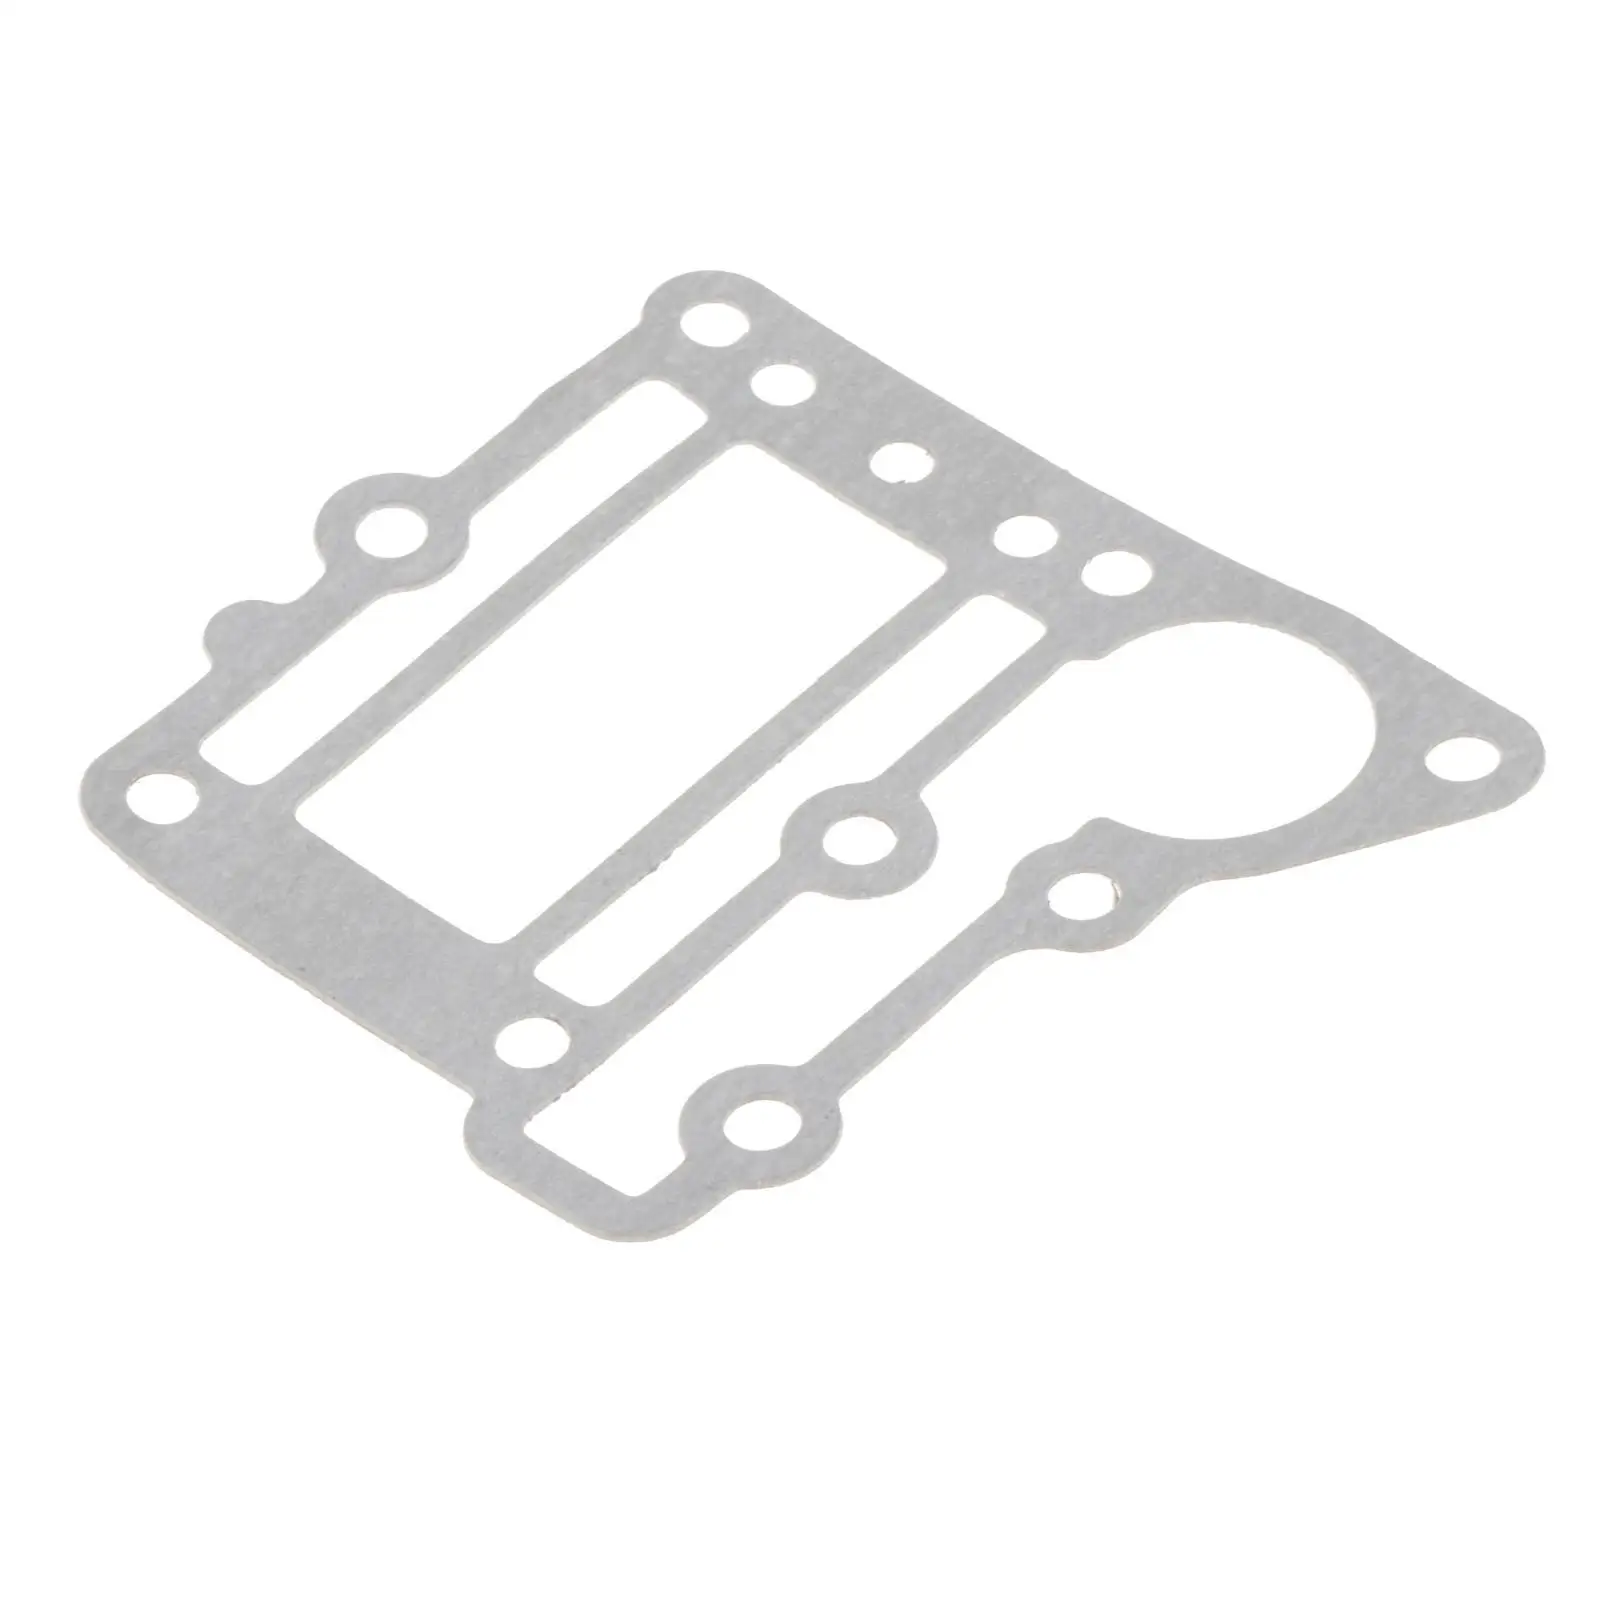 Gasket Outer Cover, 6E3-41114-A1 Outer Exhaust Gasket, Fits for Yamaha 5HP Outboard